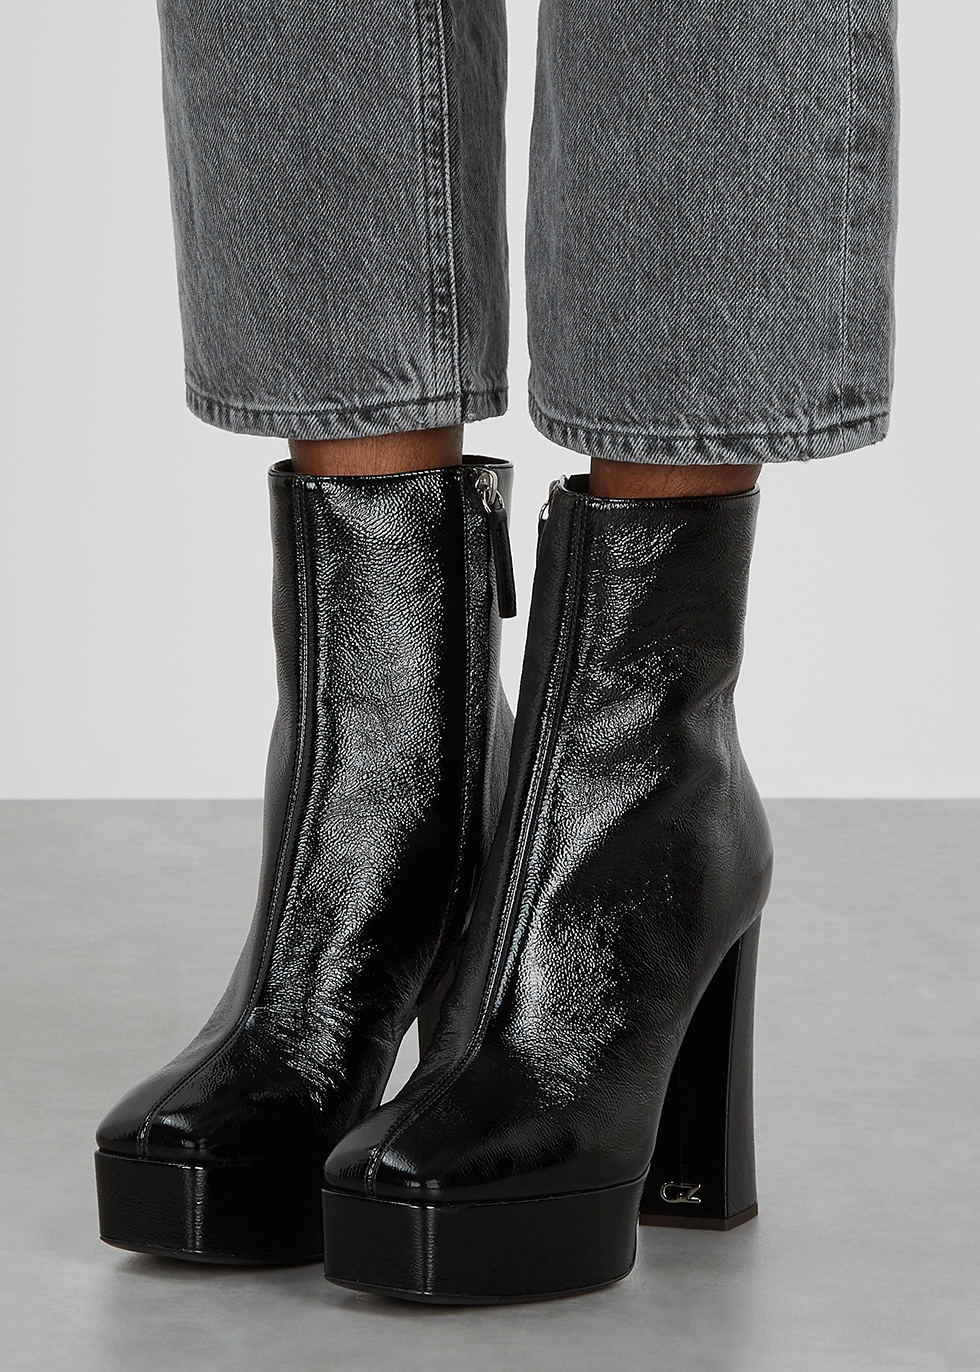 grey patent ankle boots